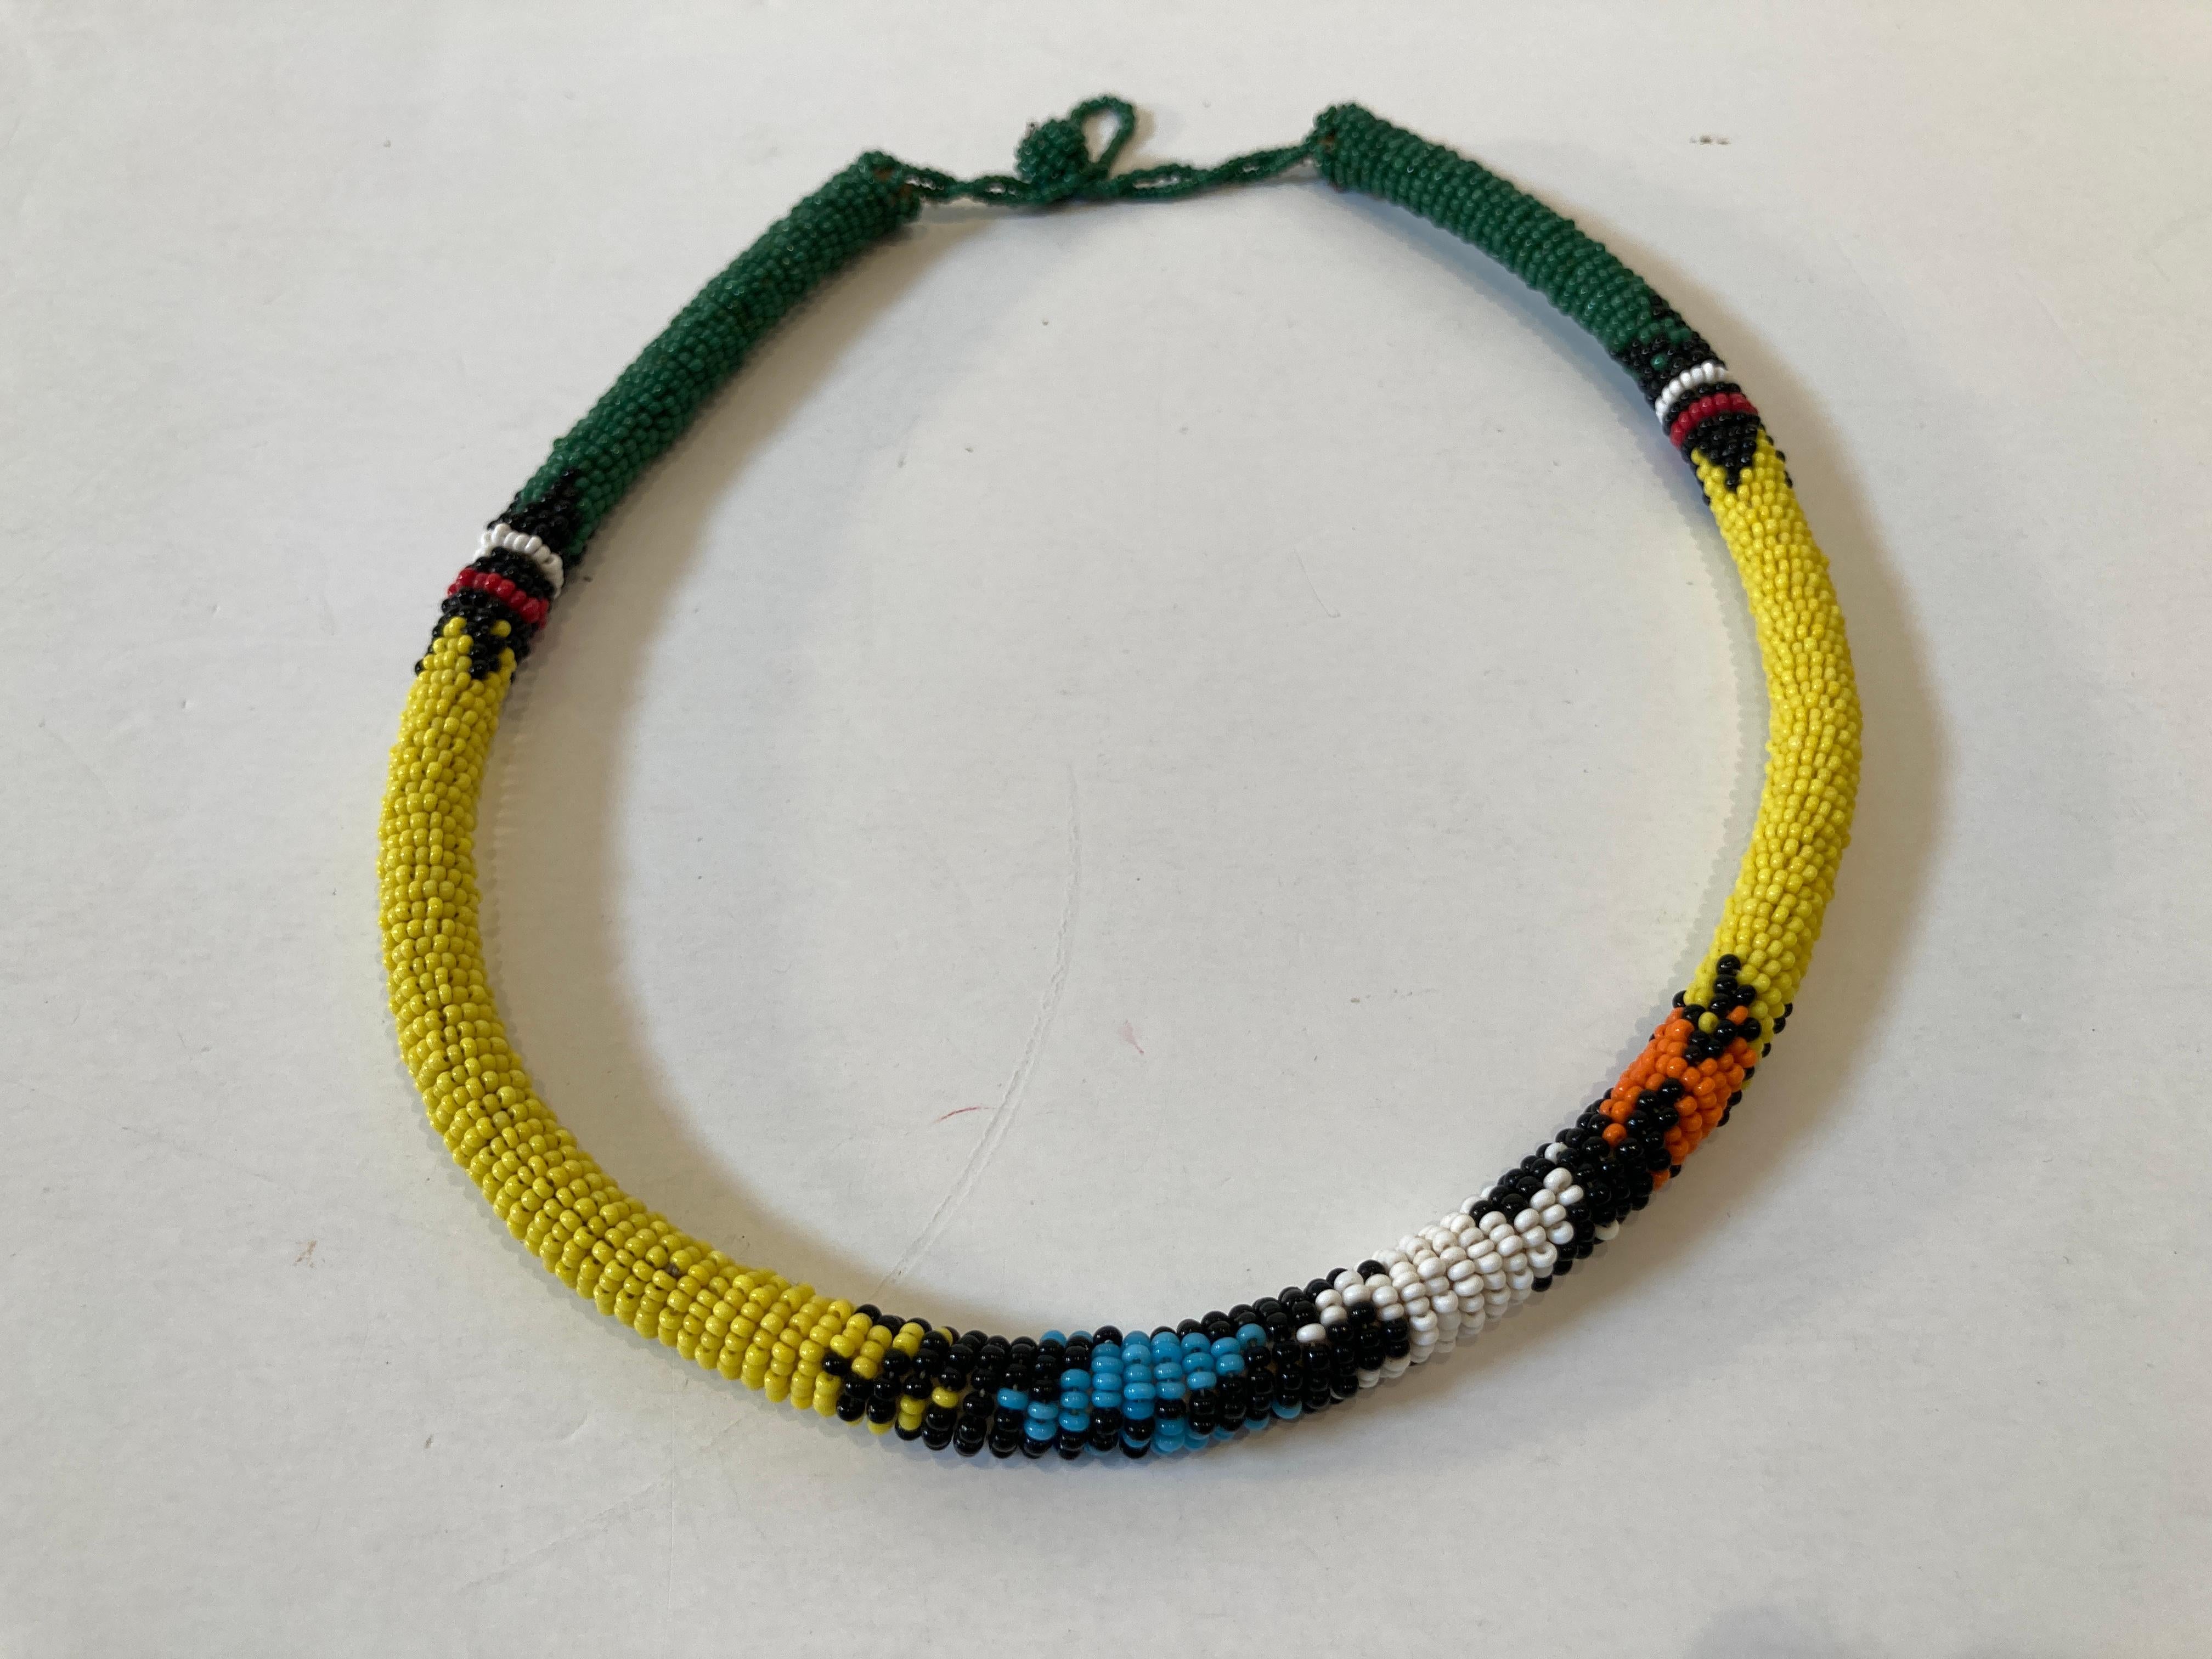 African Urembo Beaded vintage necklace choker by the Maasai Tribe Kenya
Vintage African Urembo beaded necklace choker.
Handmade in Kenya by the Maasai tribe with yellow, green, orange and black beads.
Urembo means “beauty” and the handmade